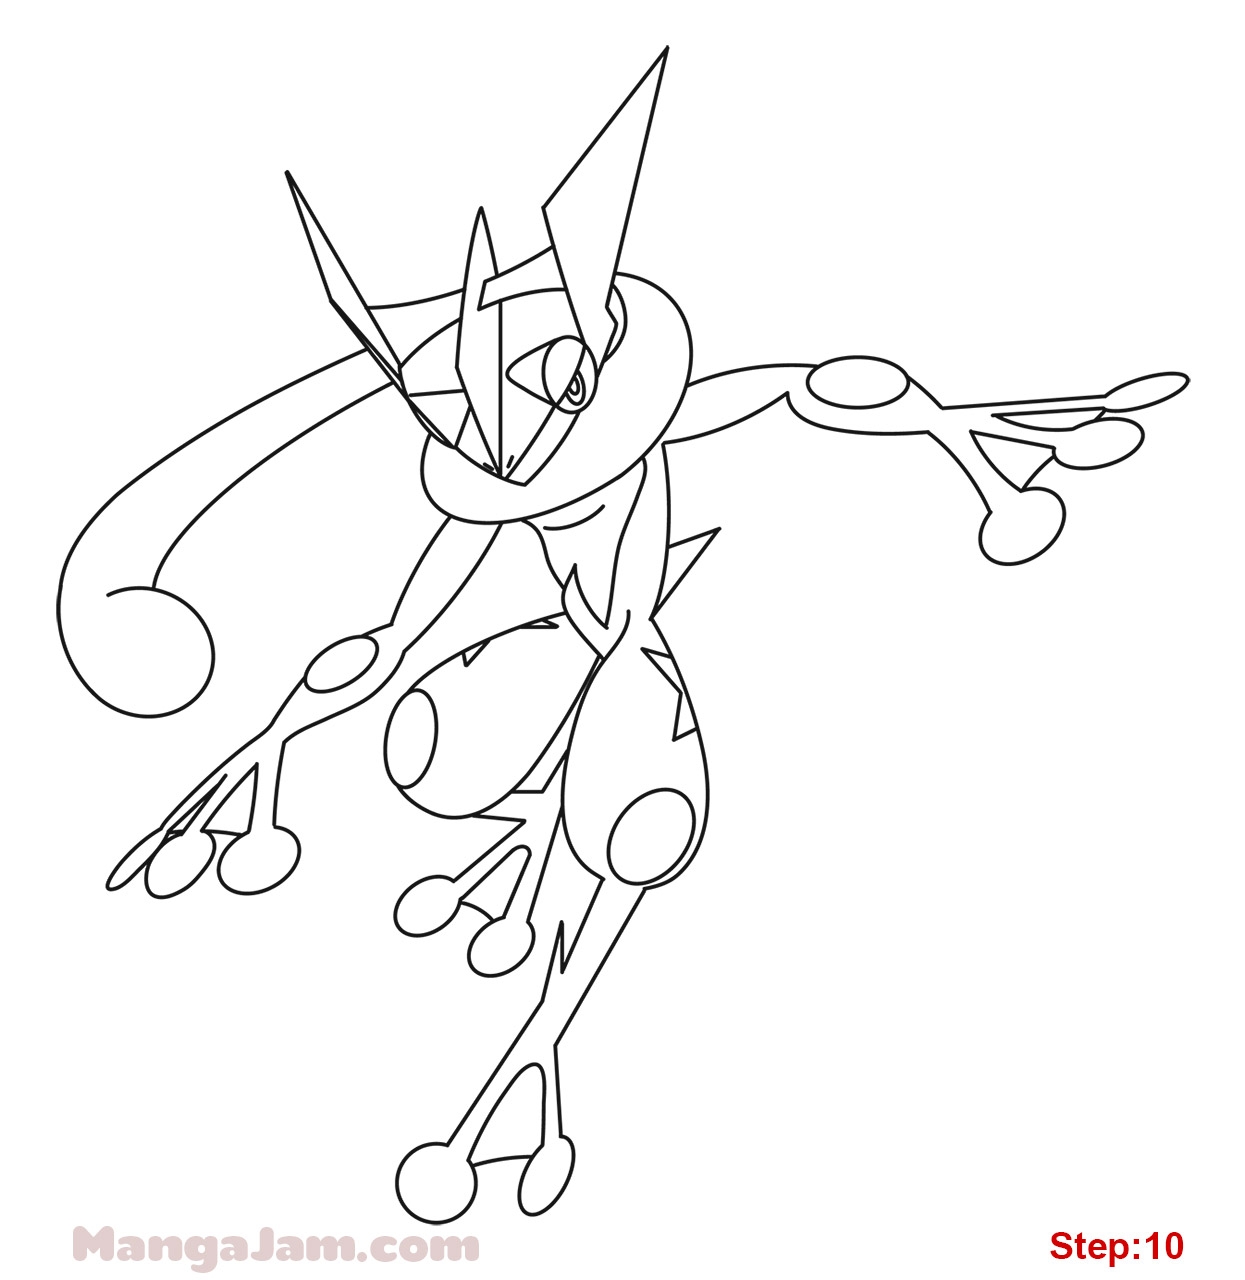 Pokemon Greninja Coloring Pages at GetColorings.com | Free printable